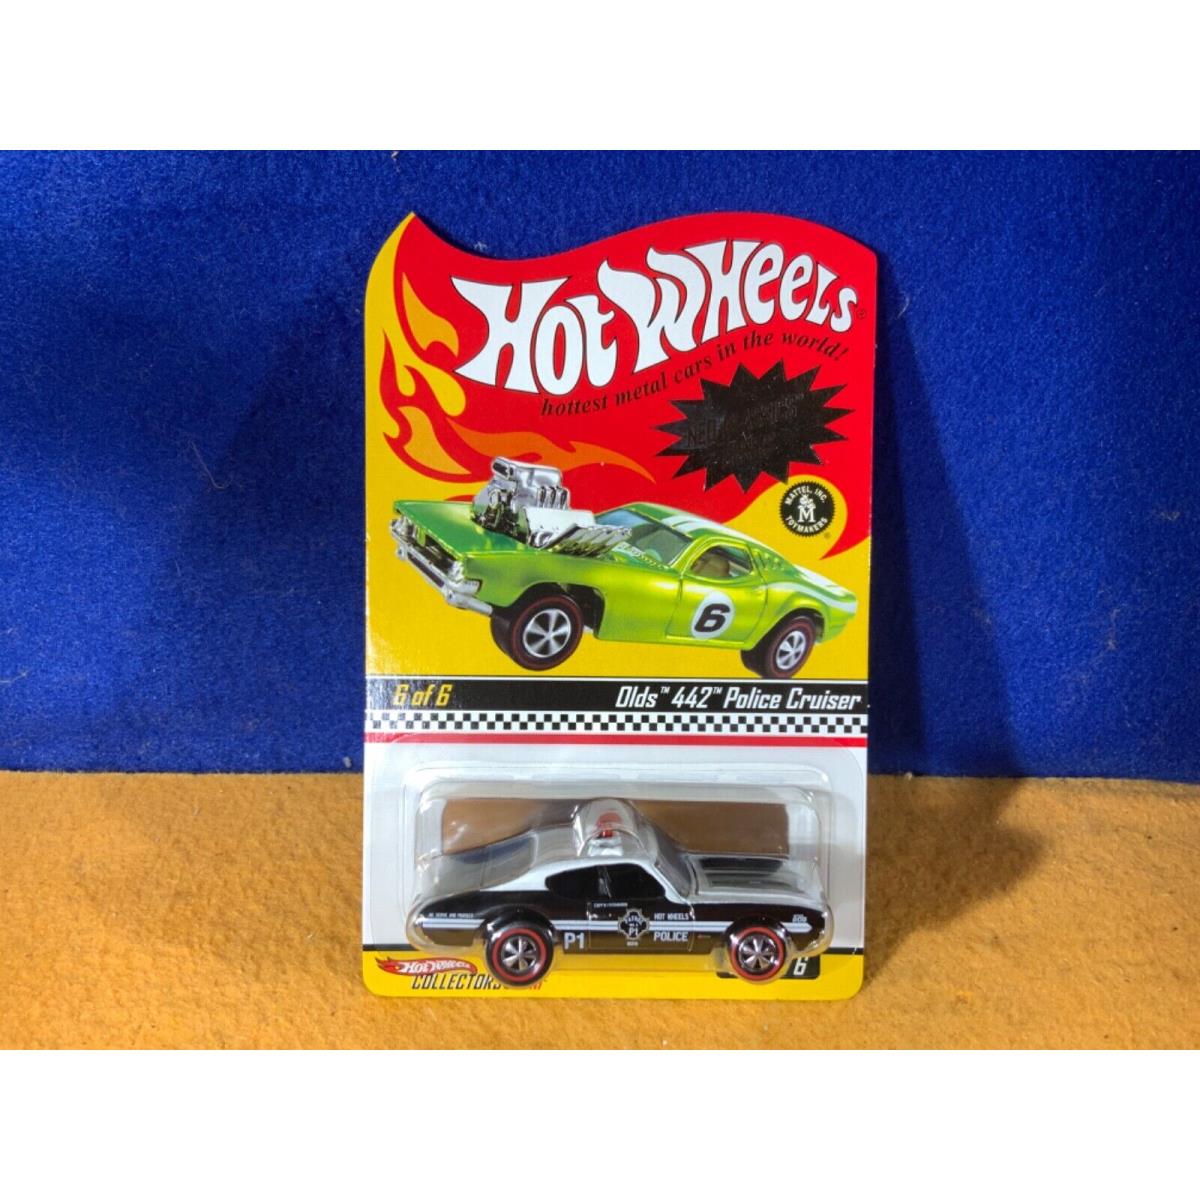 P9-35 Hot Wheels Neo-classics Series - Olds 442 Police Cruiser - 7917 / 11 000